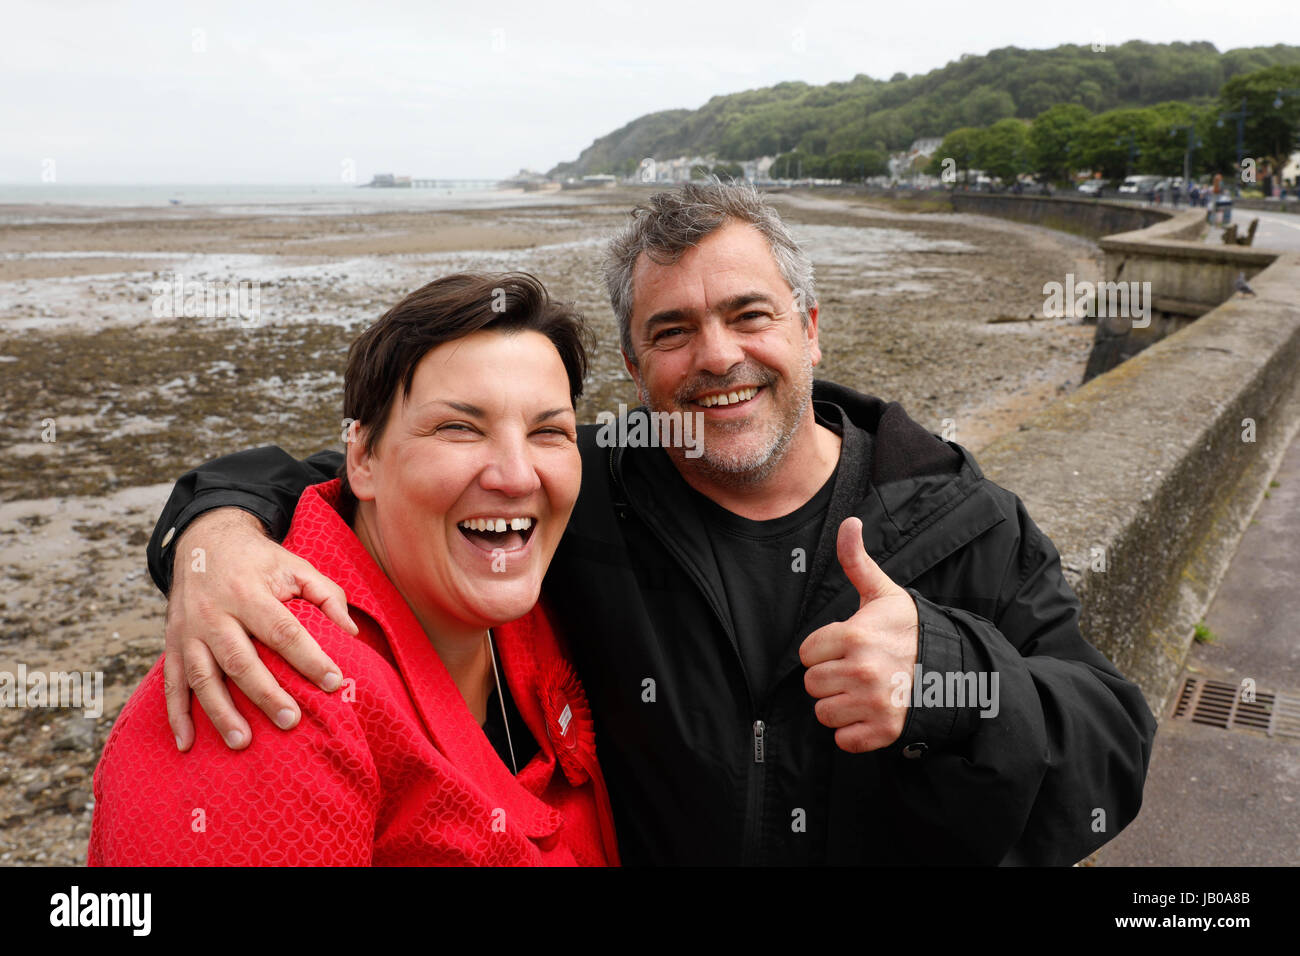 Swansea, UK. 8th June, 2017. General Election 2017. Film director and actor Kevin Allen backing candidate for Gower Tonia Antoniazzi . Gower is the UK's most marginal seat after Conservative Byron Davies won by just 27 votes in 2015. Labour ha.previously held the seat for over 100 years. Credit: Gareth Llewelyn/Alamy Live News Stock Photo